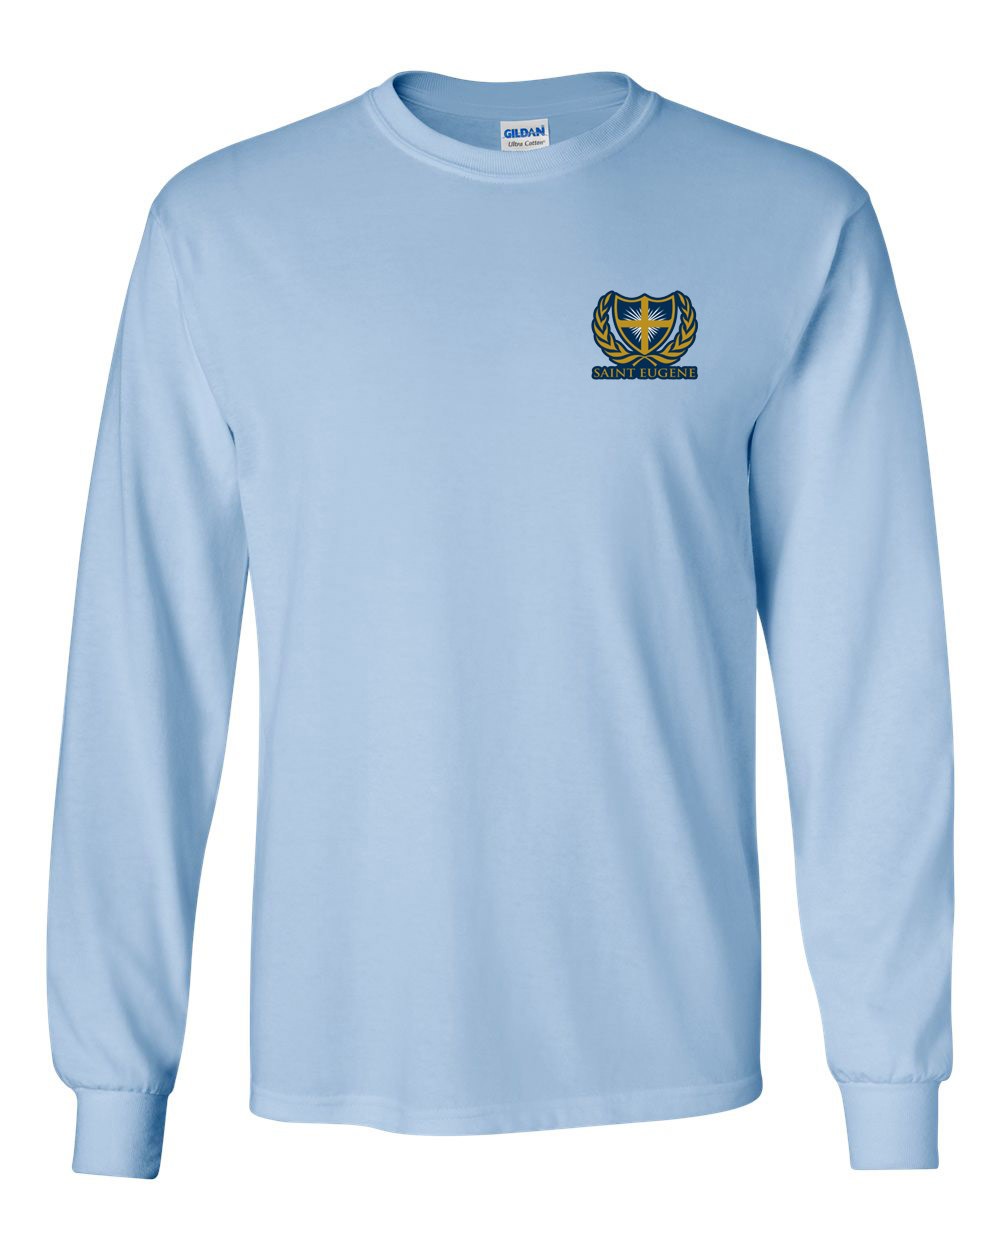 SES Light Blue L/S Staff Shirt w/ Logo - Please Allow 2-3 Weeks for Delivery